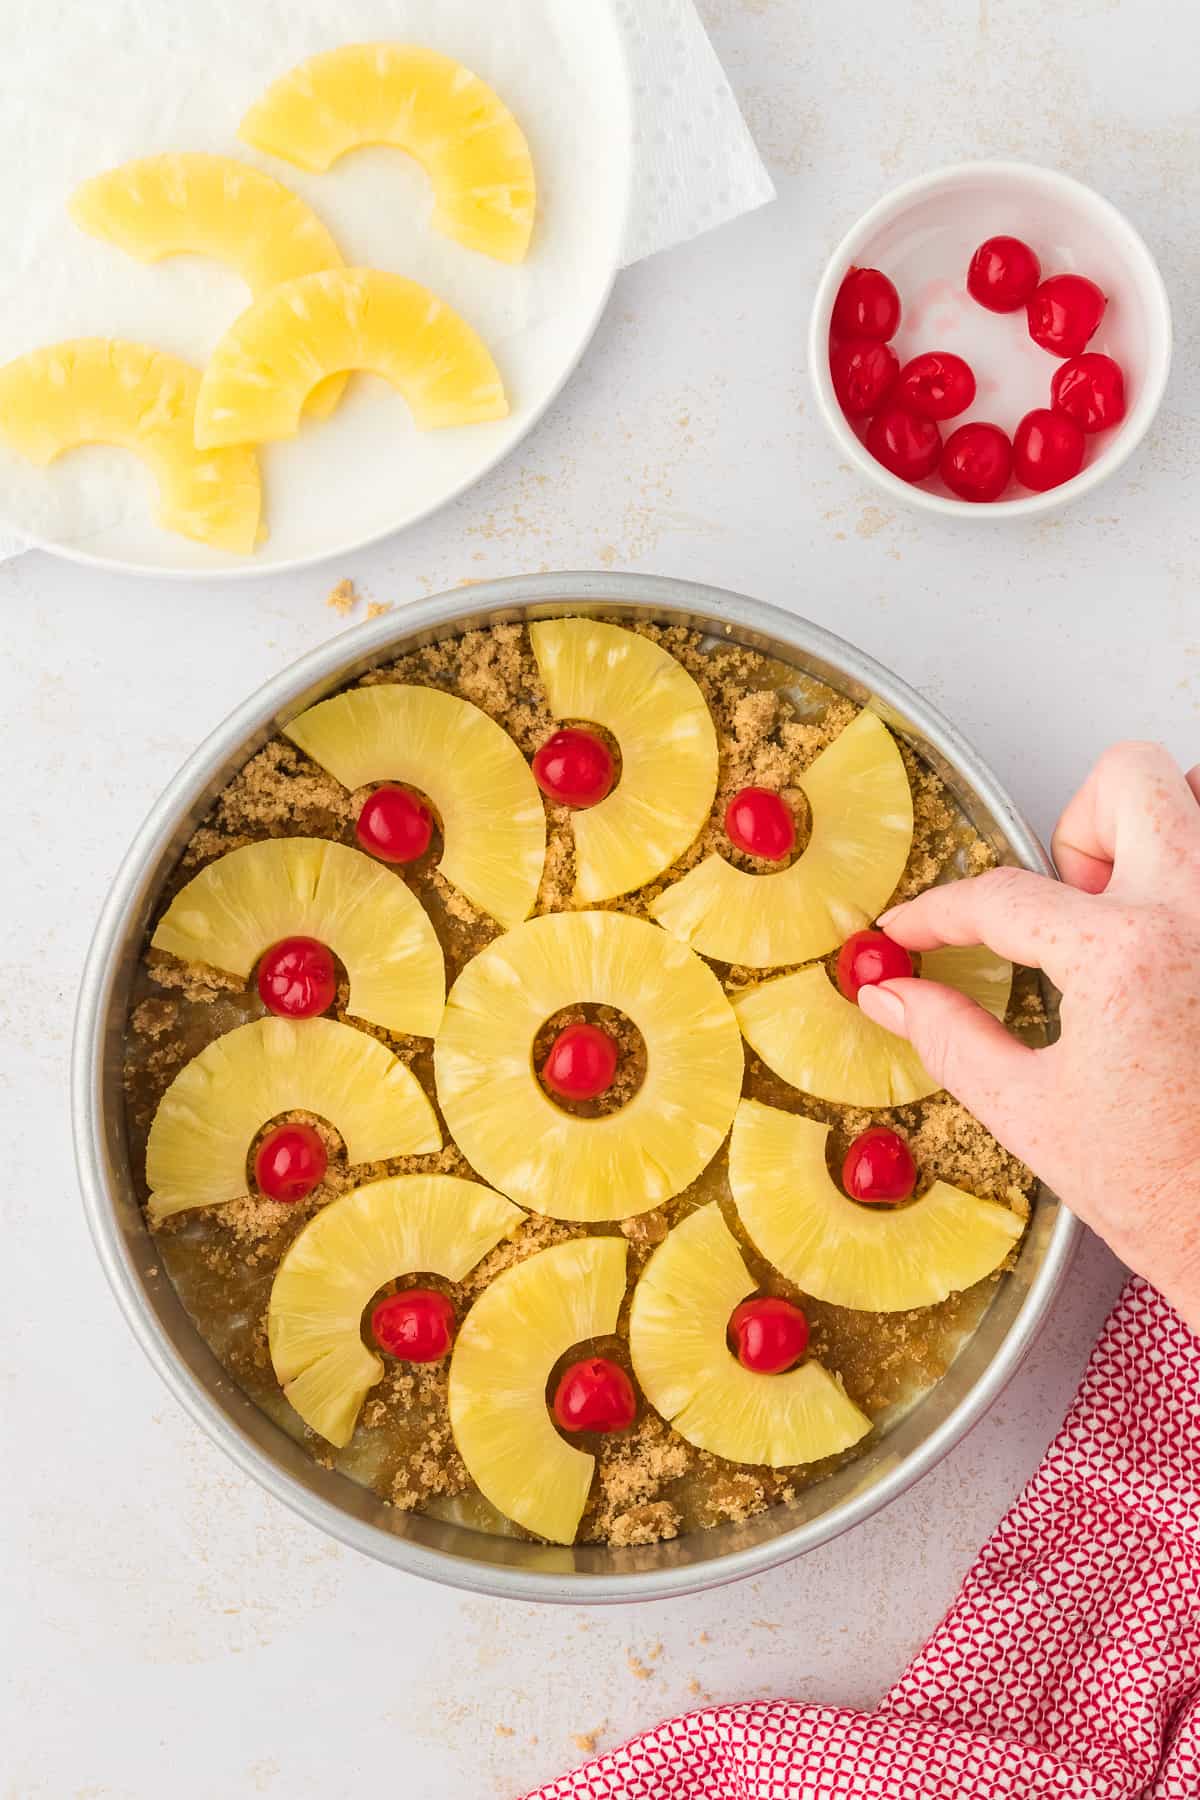 a cake pan with brown sugar and melted butter in the bottom and a hand arranging pineapple slices and maraschino cherries in it, beside a red and white kitchen towel, a plate of sliced pineapple and a small bowl of cherries